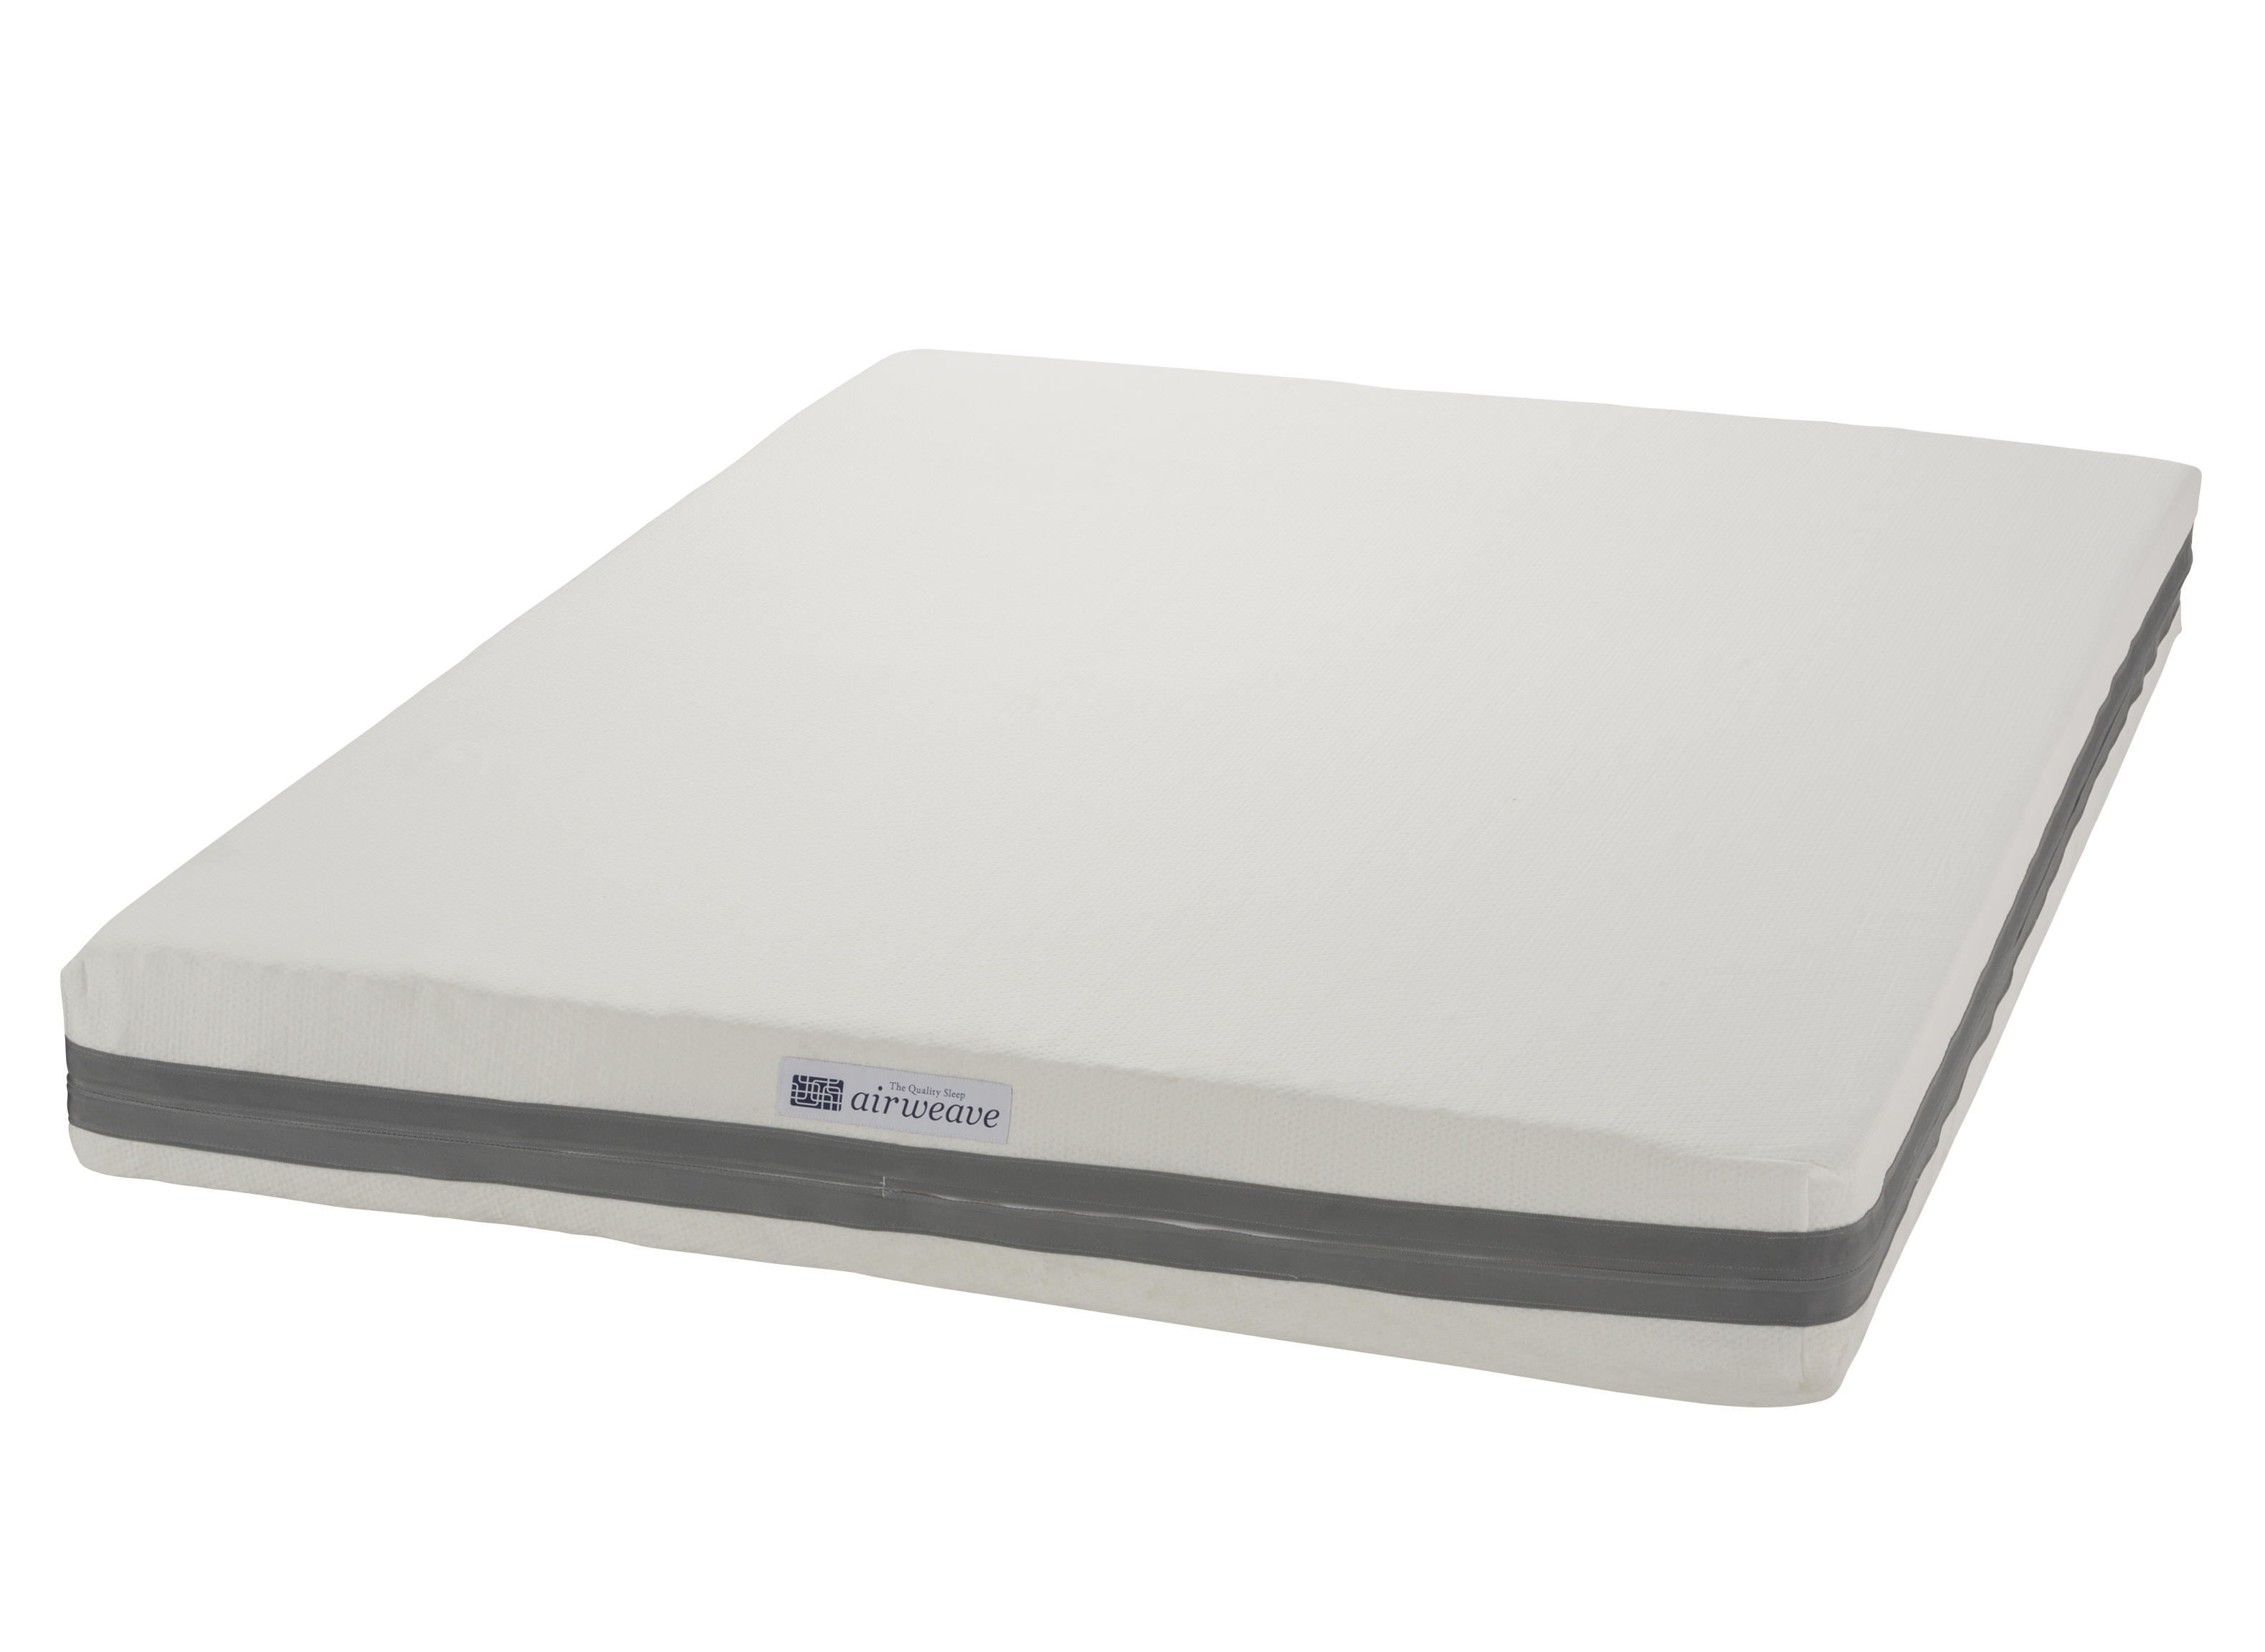 https://crdms.images.consumerreports.org/prod/products/cr/models/387941-mattresses-airweave-85airfiber.png